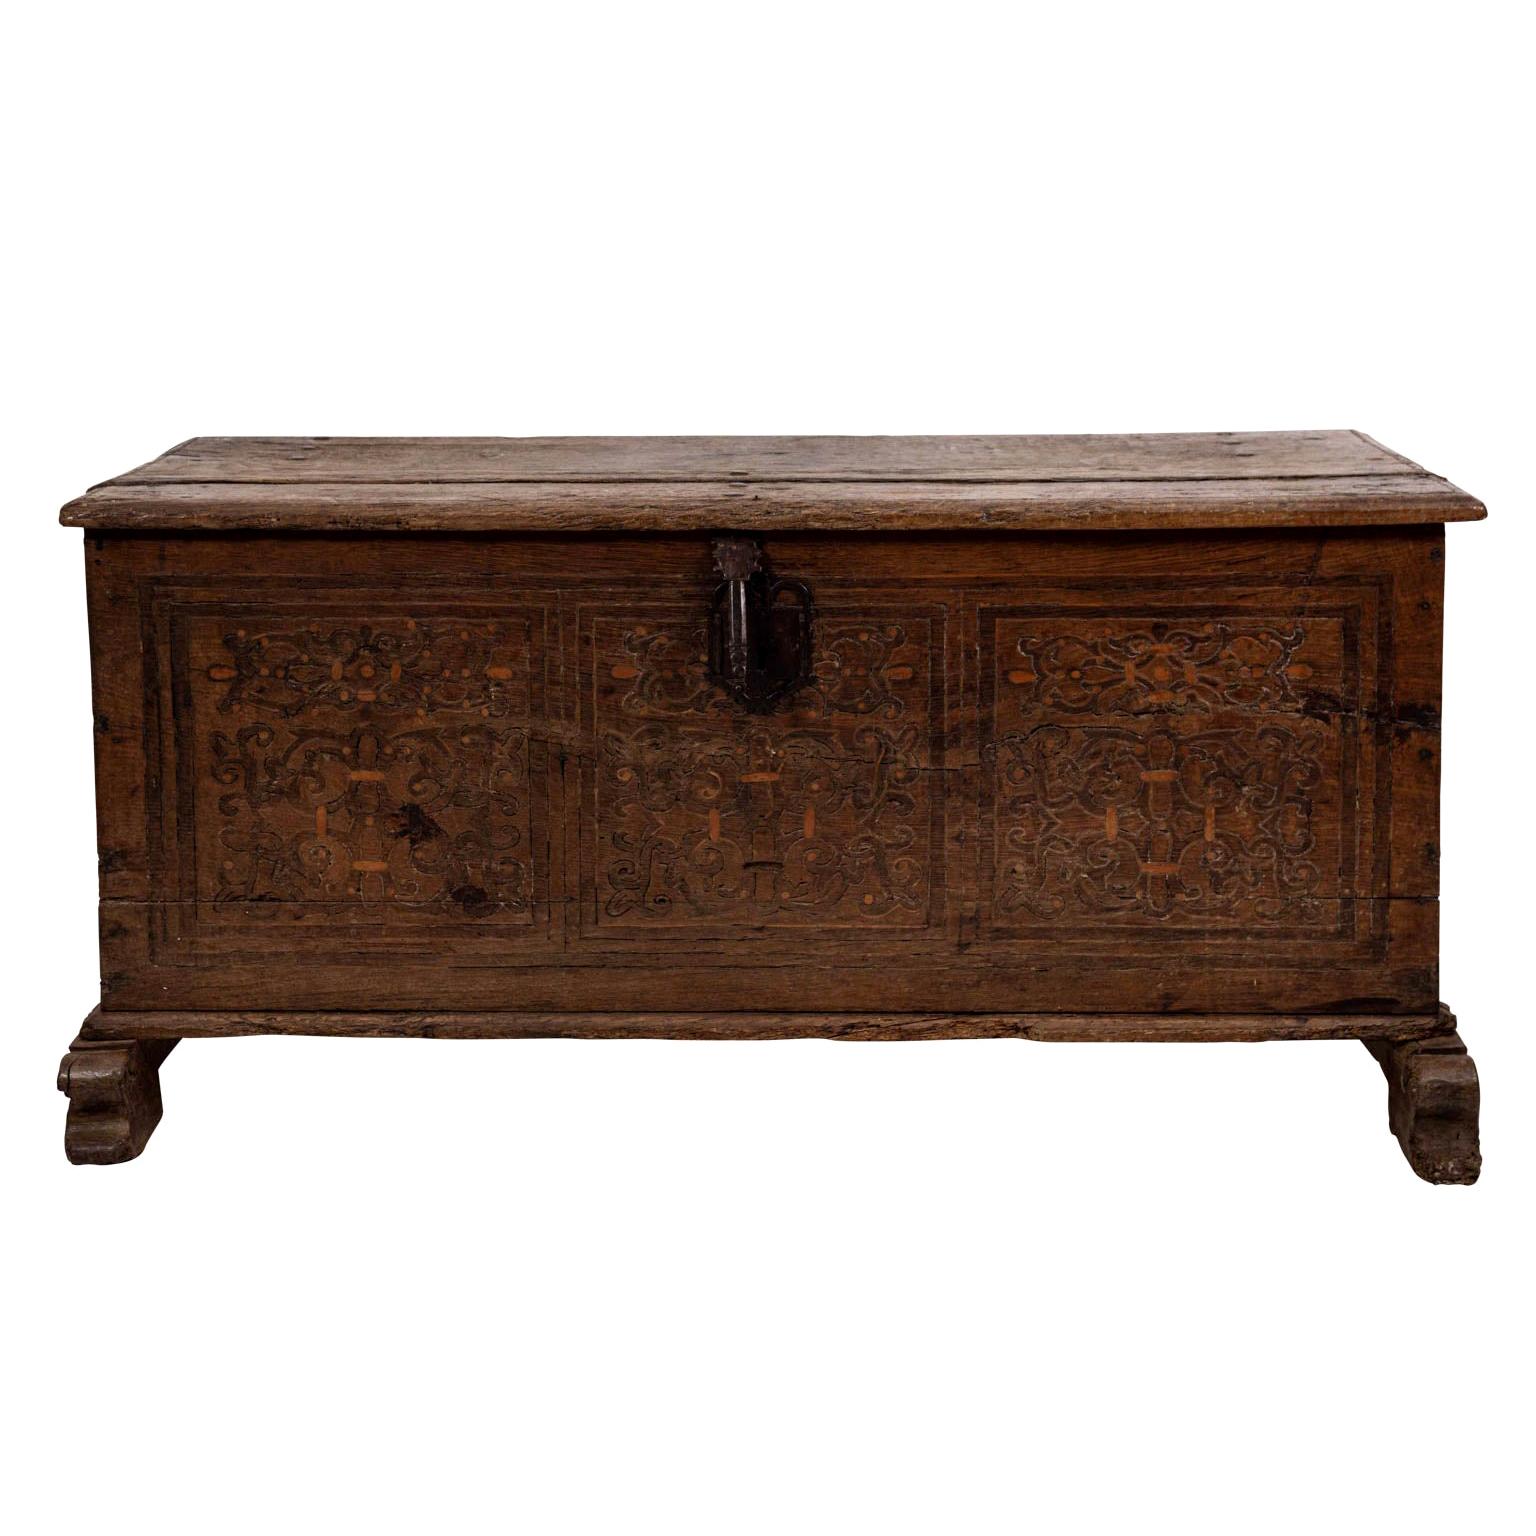 18th Century Continental Style Oakwood Blanket Chest For Sale